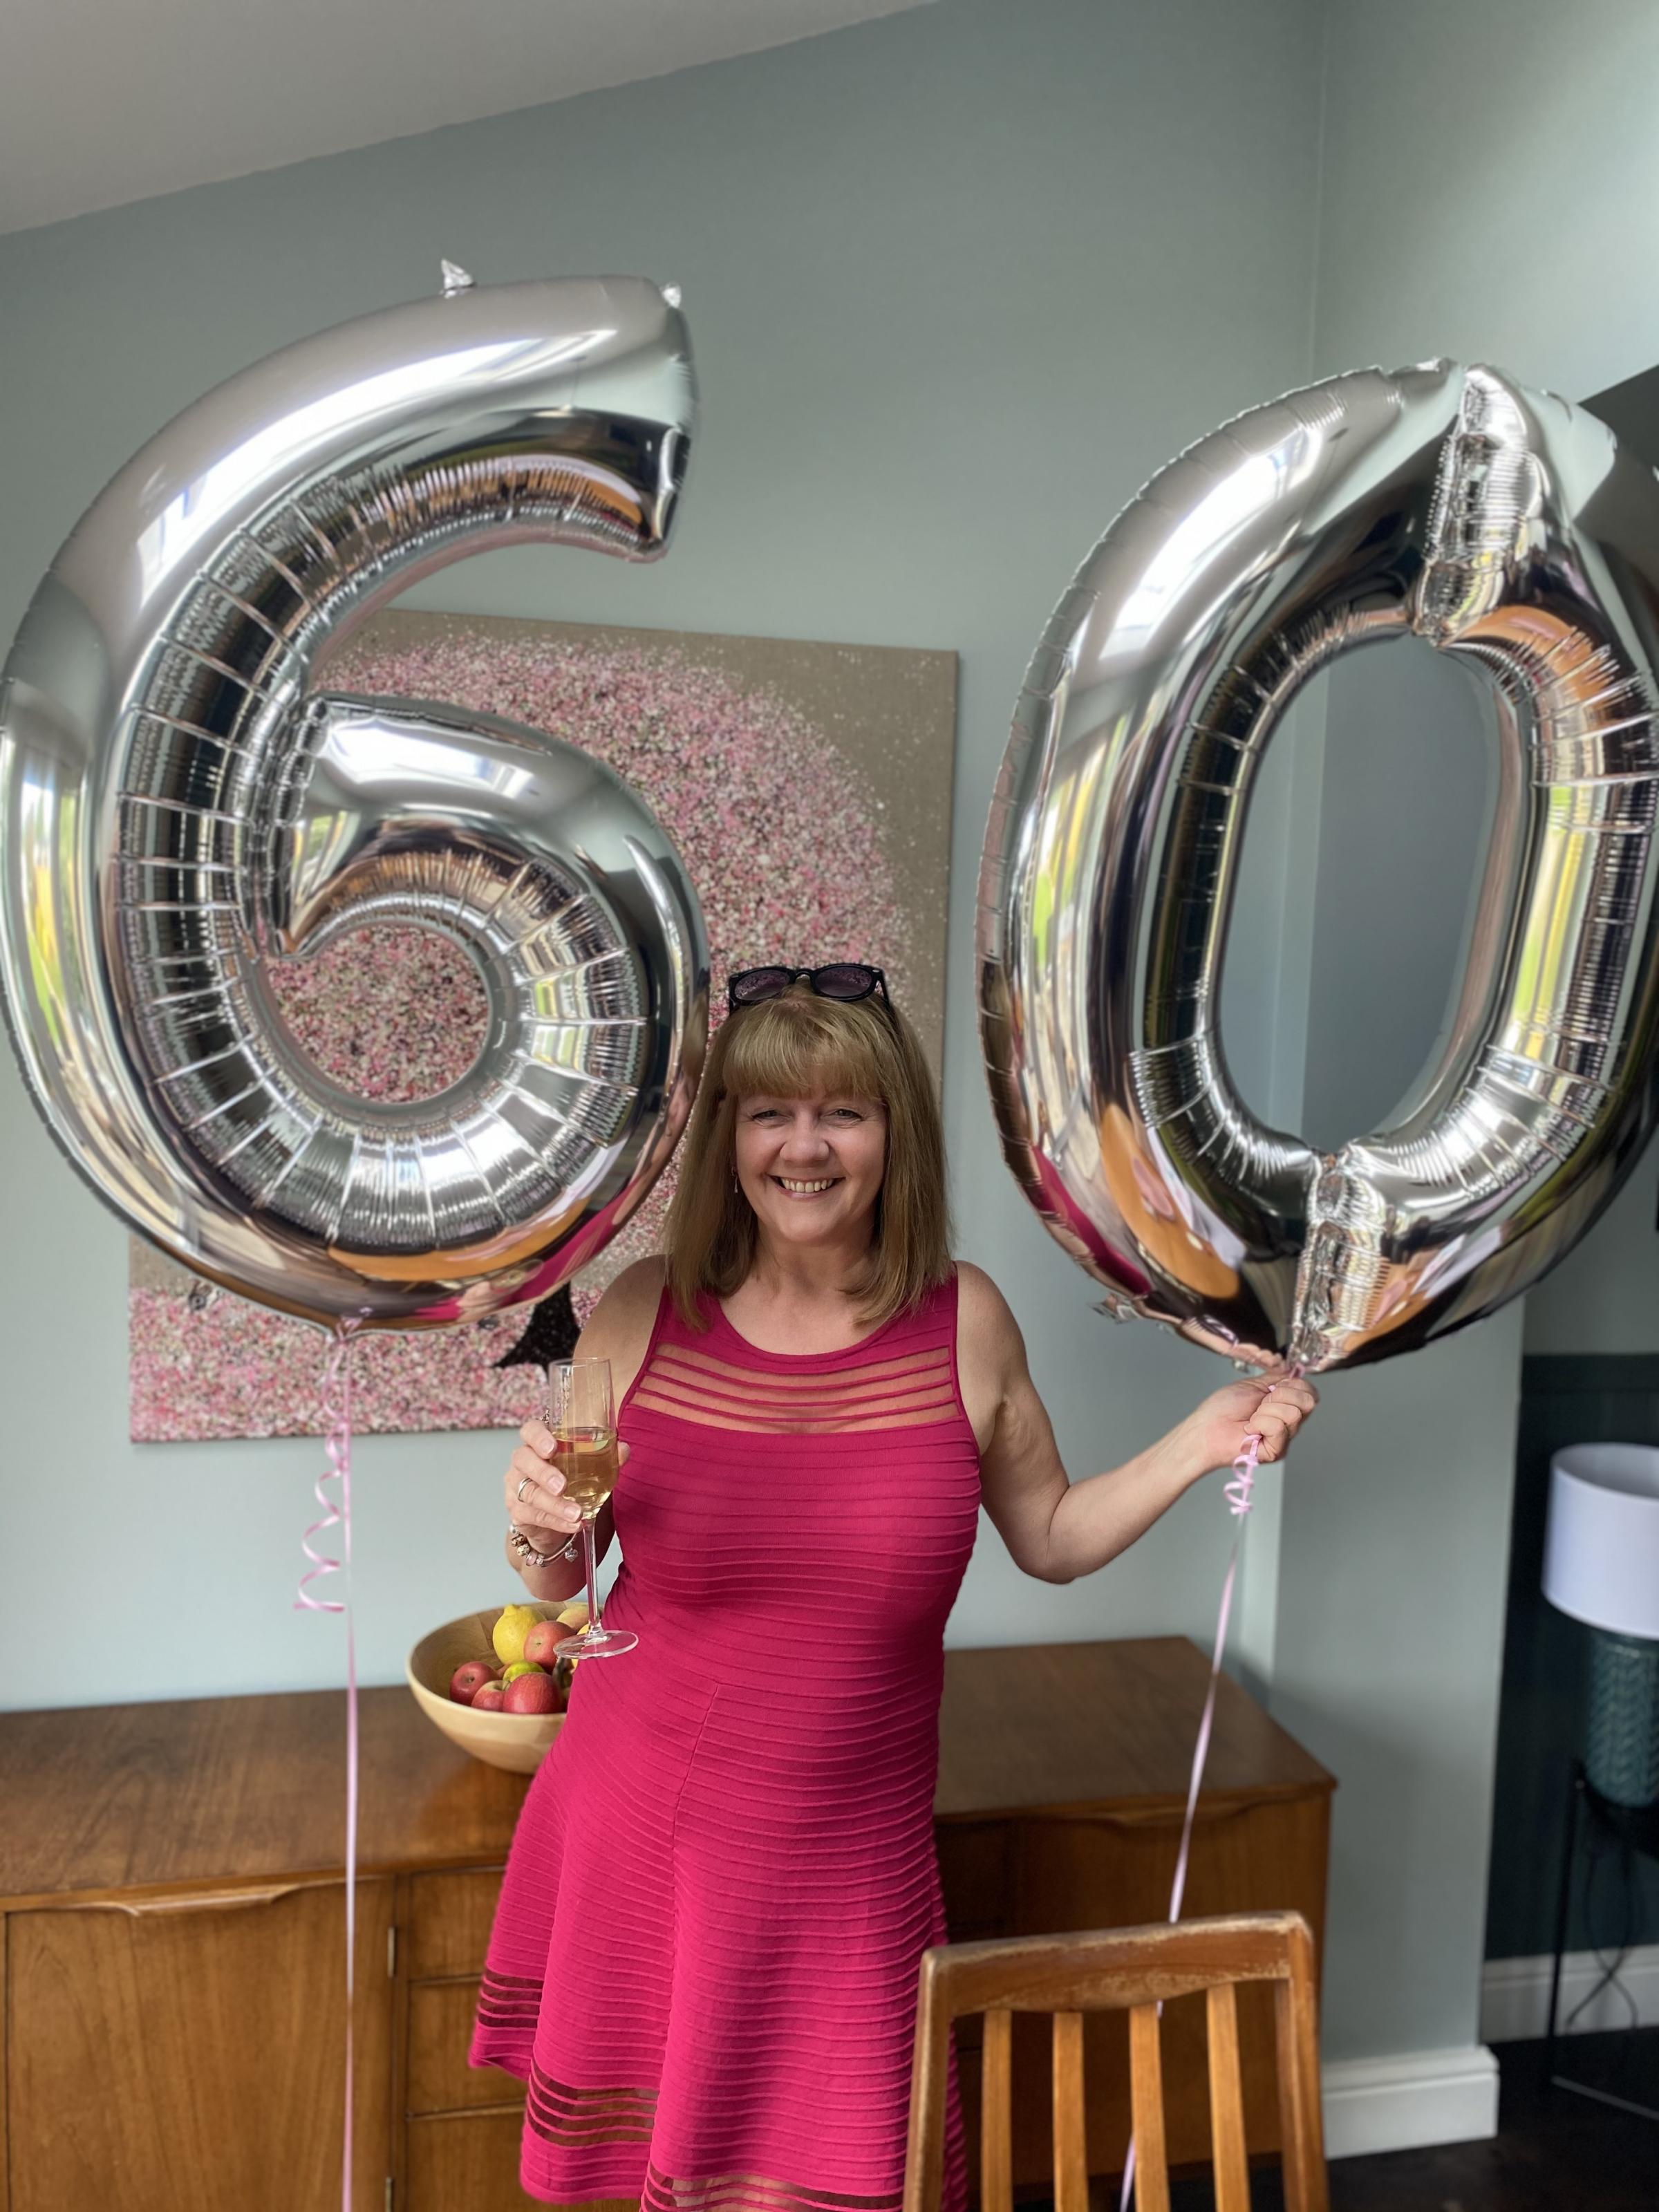 Helen French, 60, is fundraising for Pancreatic Cancer UK after undergoing emergency life-saving surgery to remove her pancreas this year. Only ten per cent of people diagnosed with pancreatic cancer are able to be operated on. The general five-year